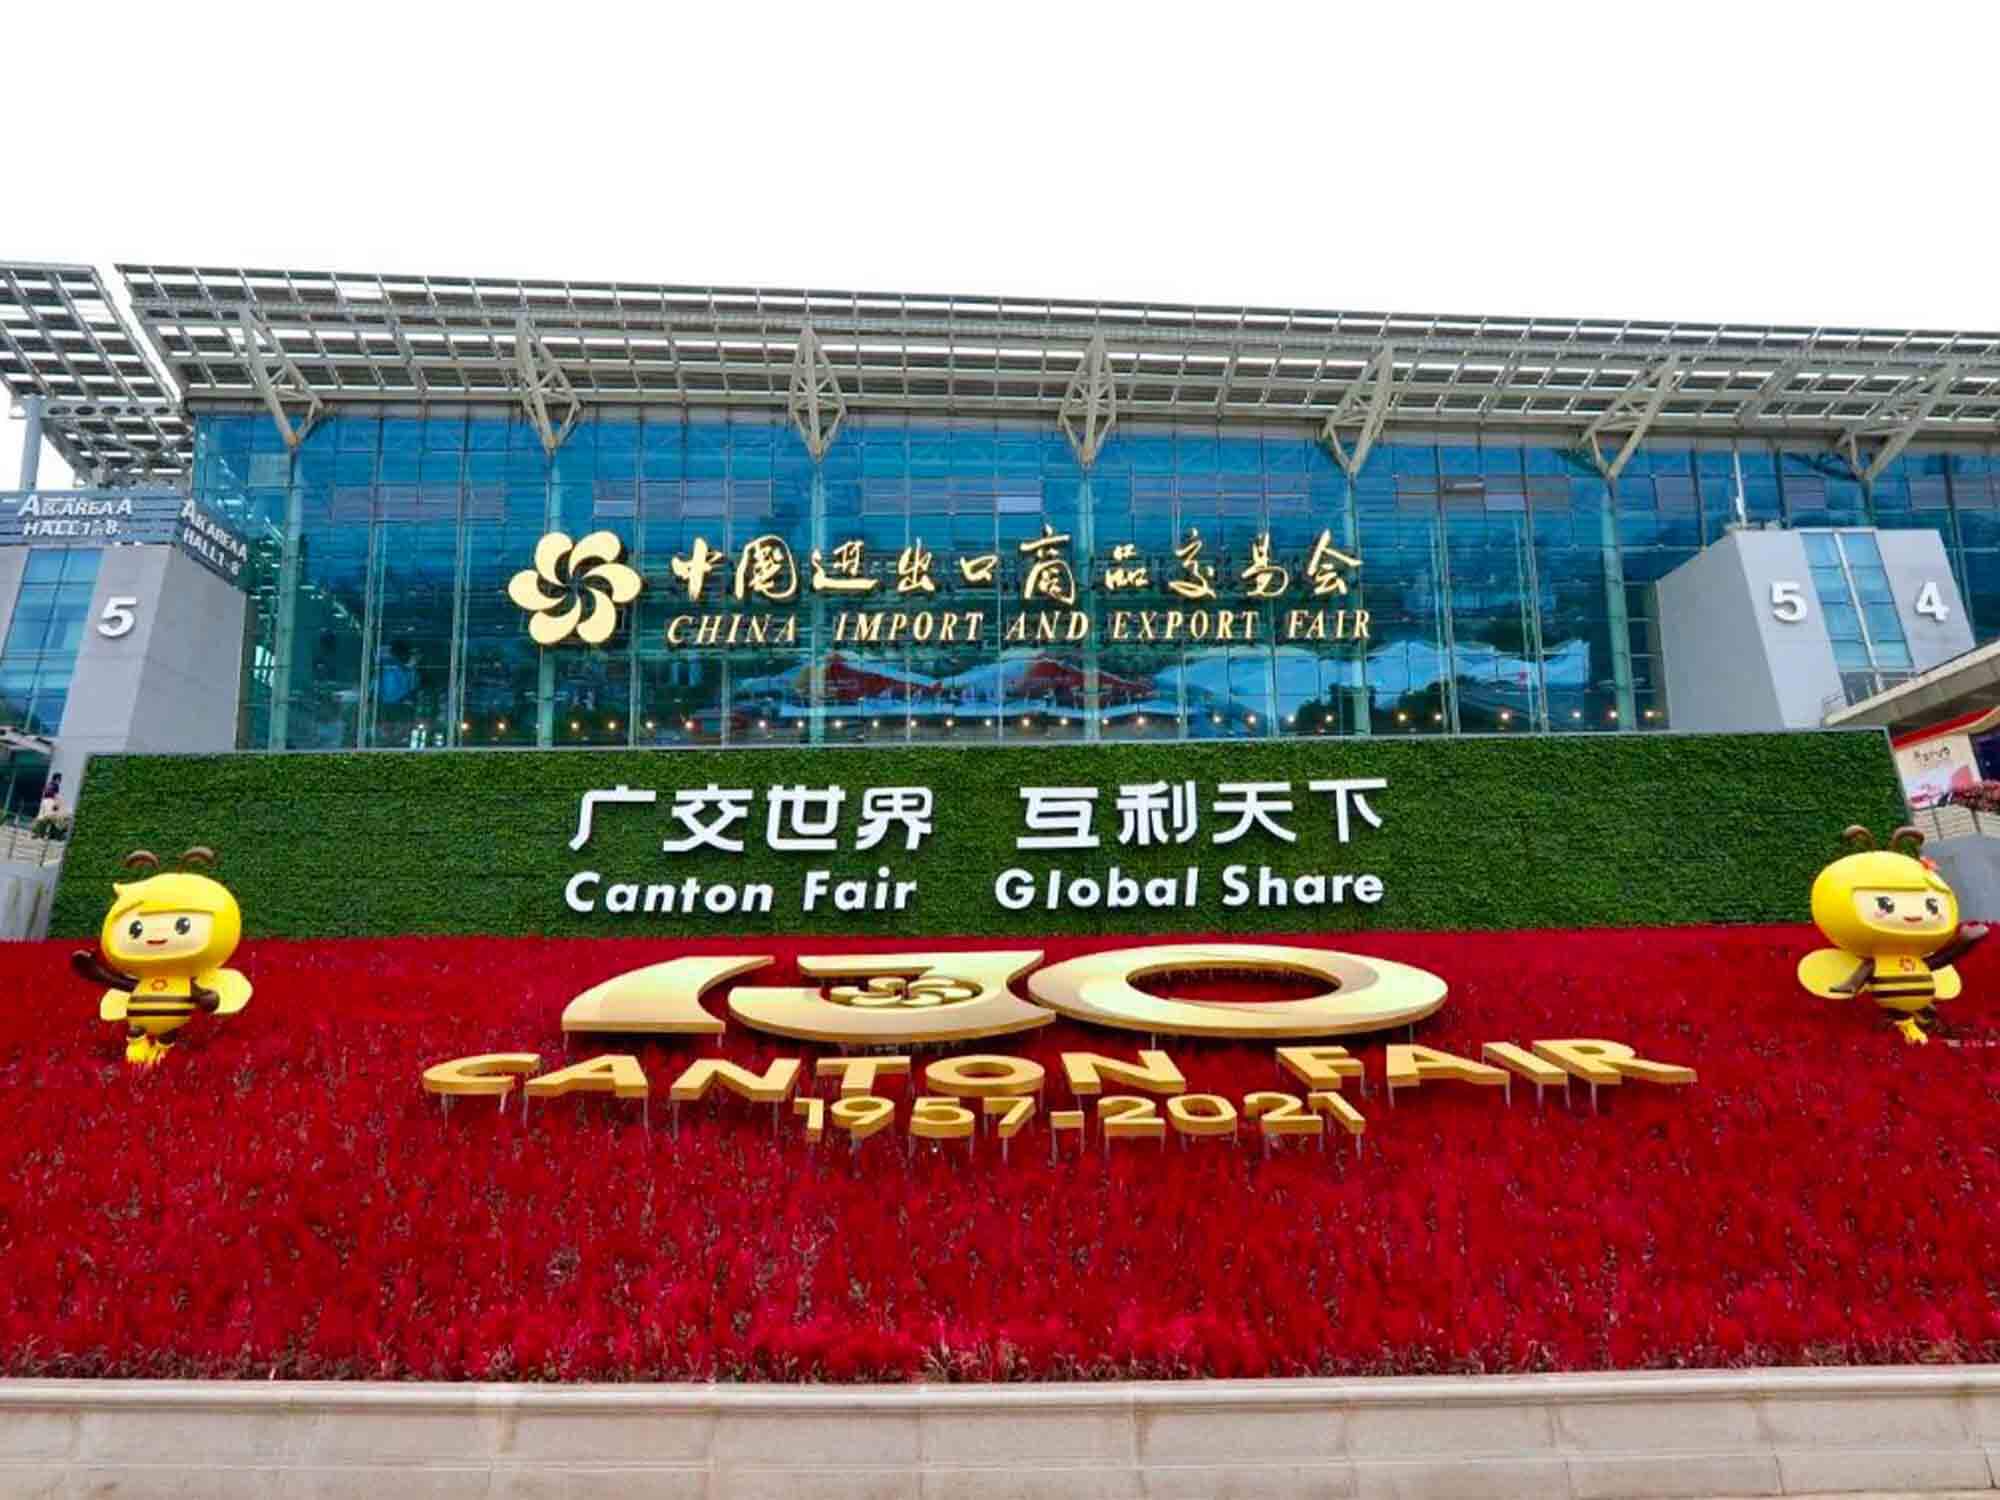 Changzhou Yongzhuan Motor Co., Ltd. made a wonderful appearance at the 121st Spring Canton Fair